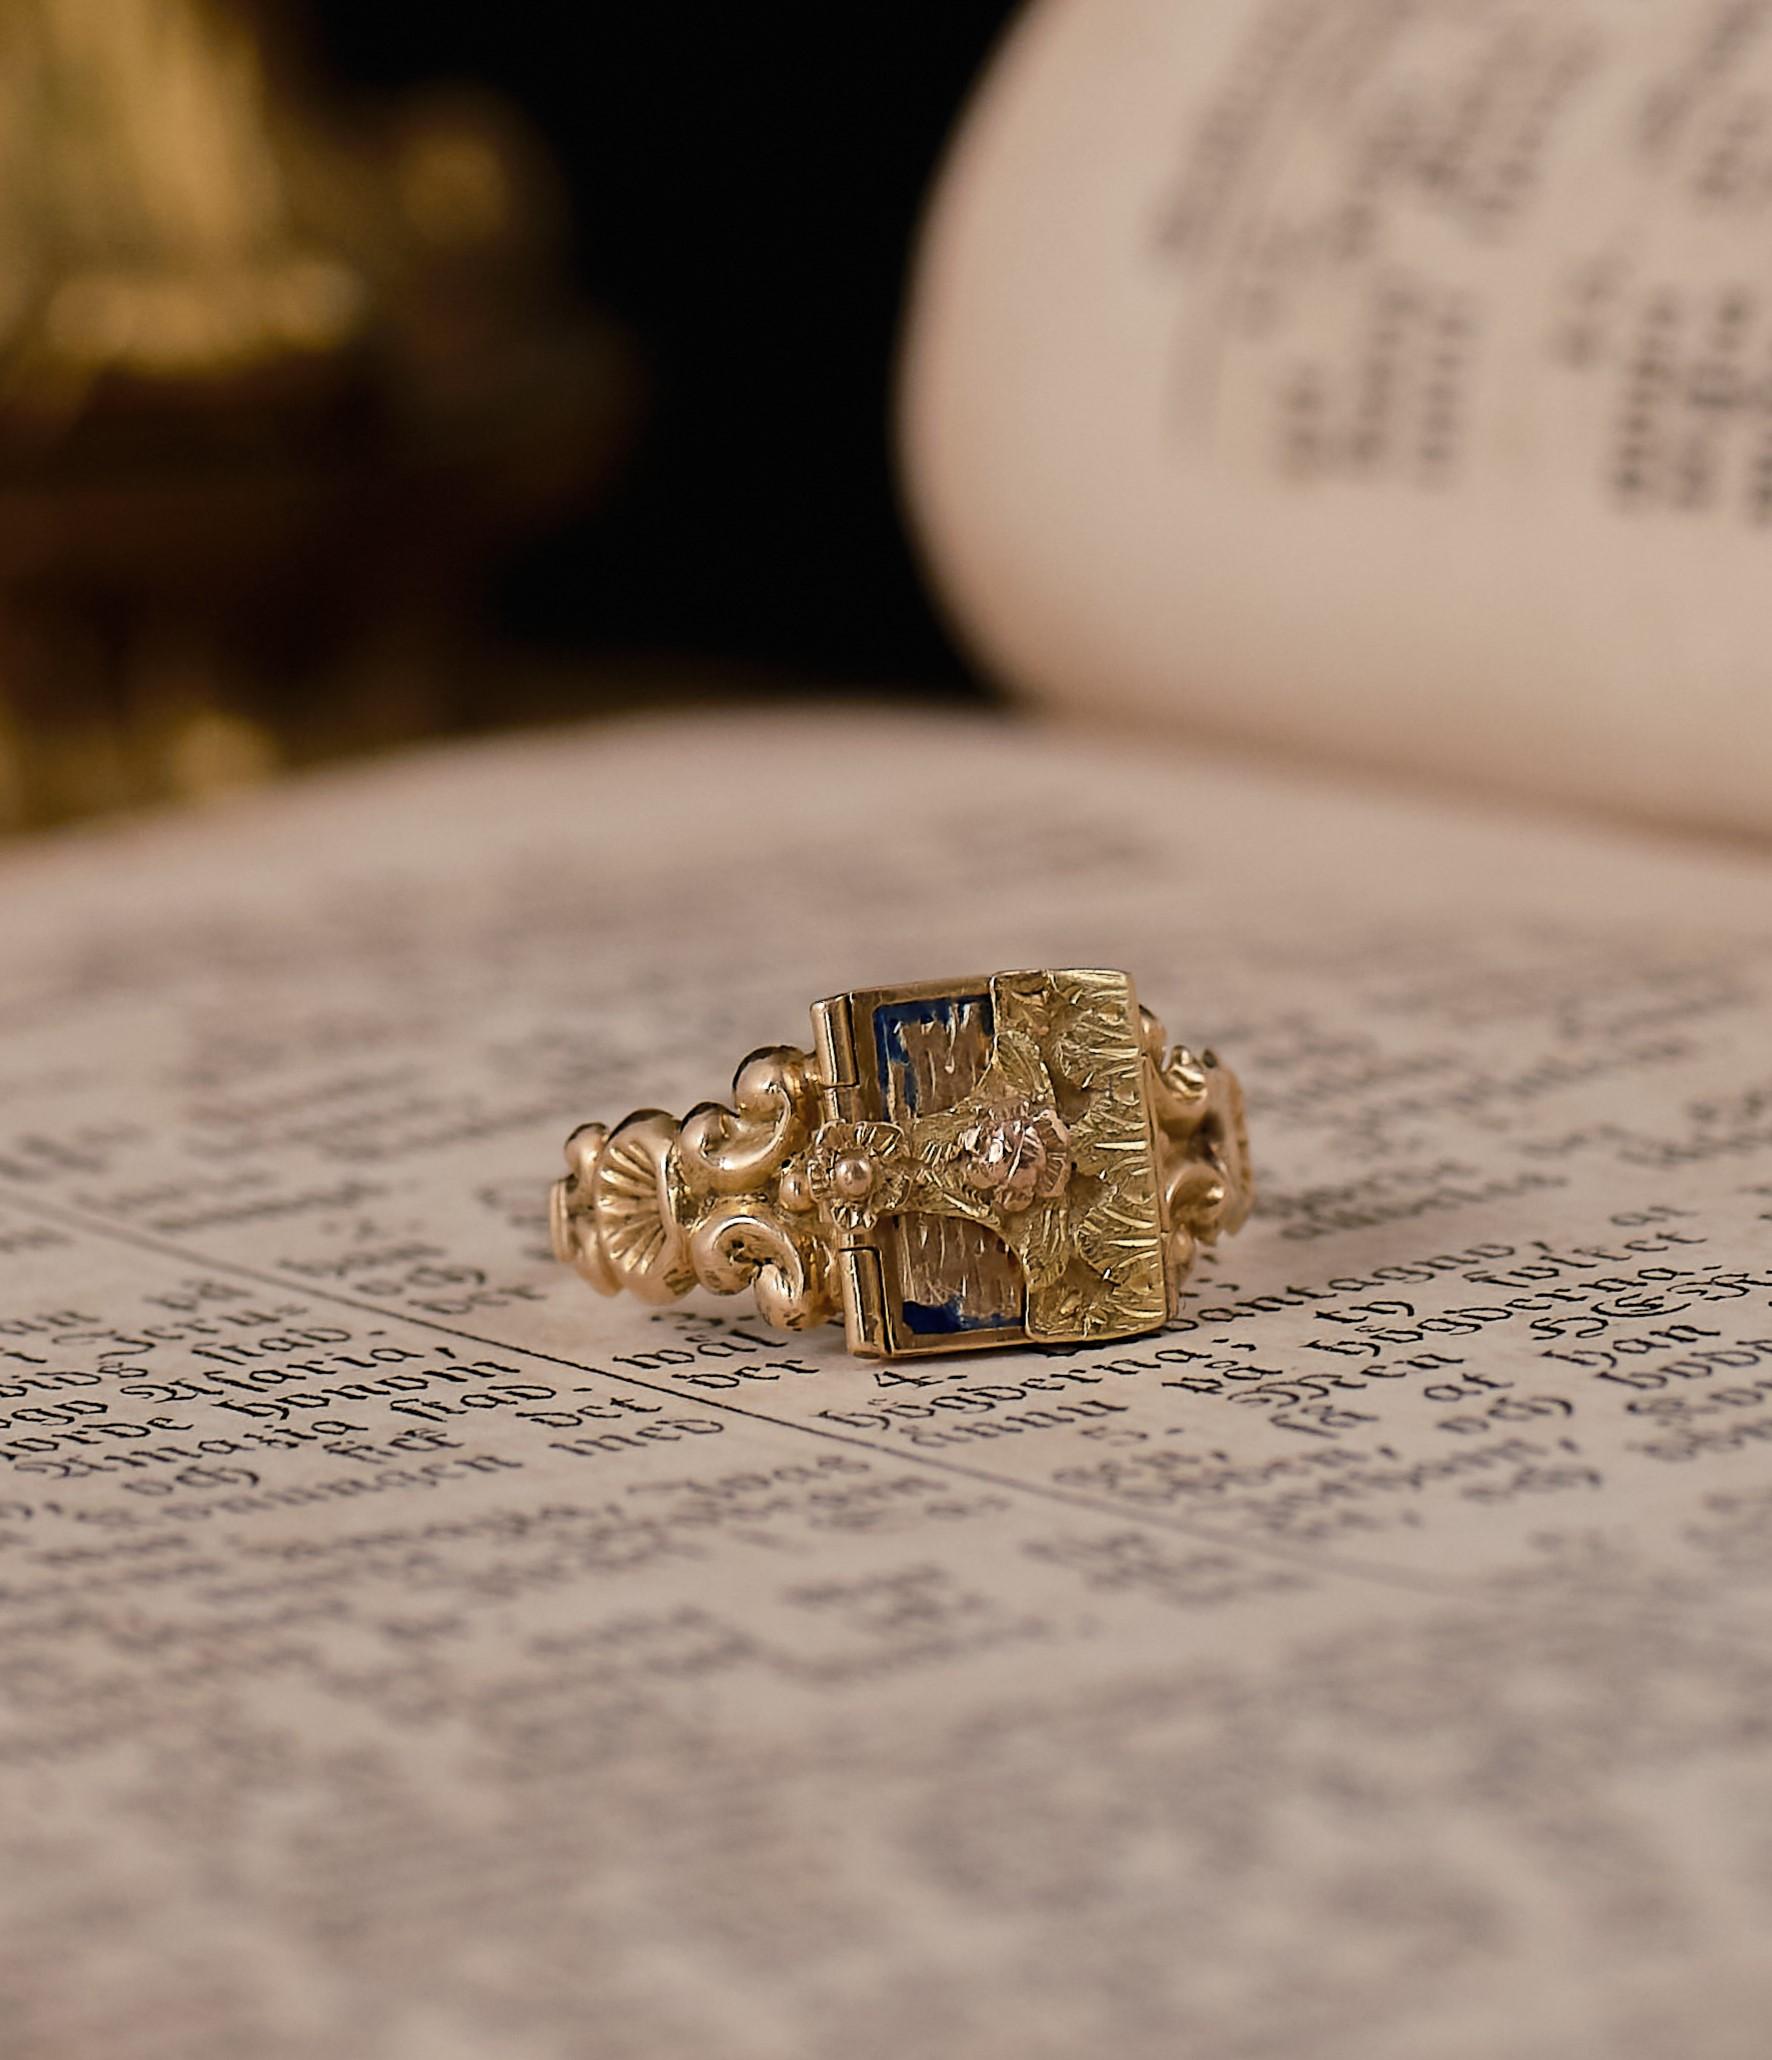 Romantic 19th century Rococo Revival “forget-me-not” remembrance ring 3